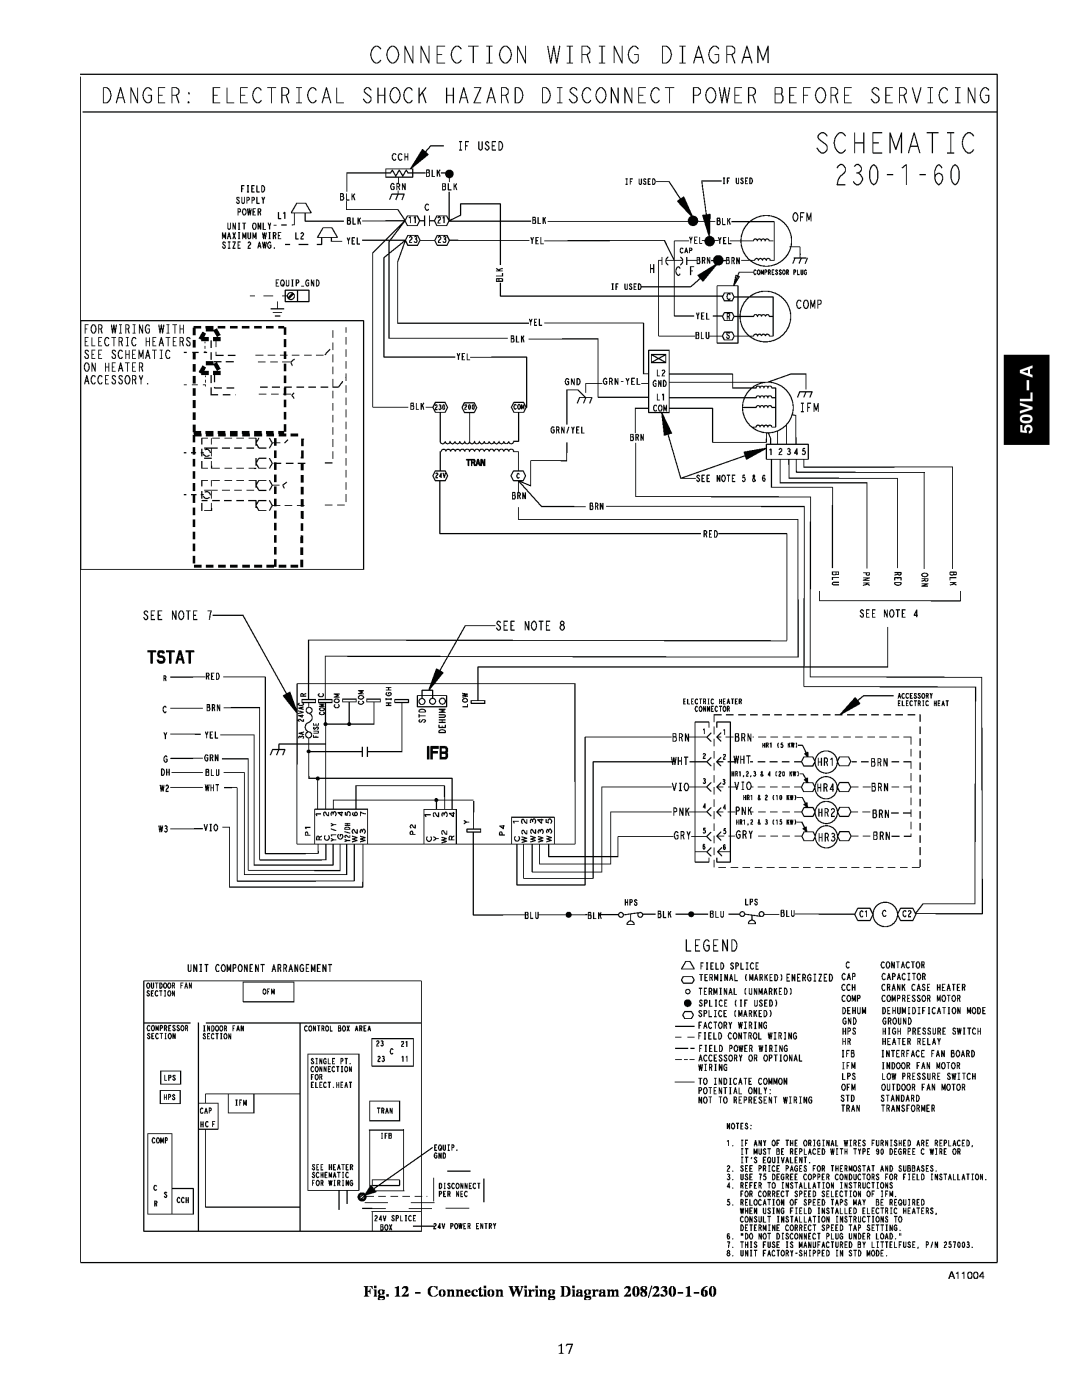 Carrier 50VL---A installation instructions 50VL A, Connection Wiring Diagram 208/230-1-60 